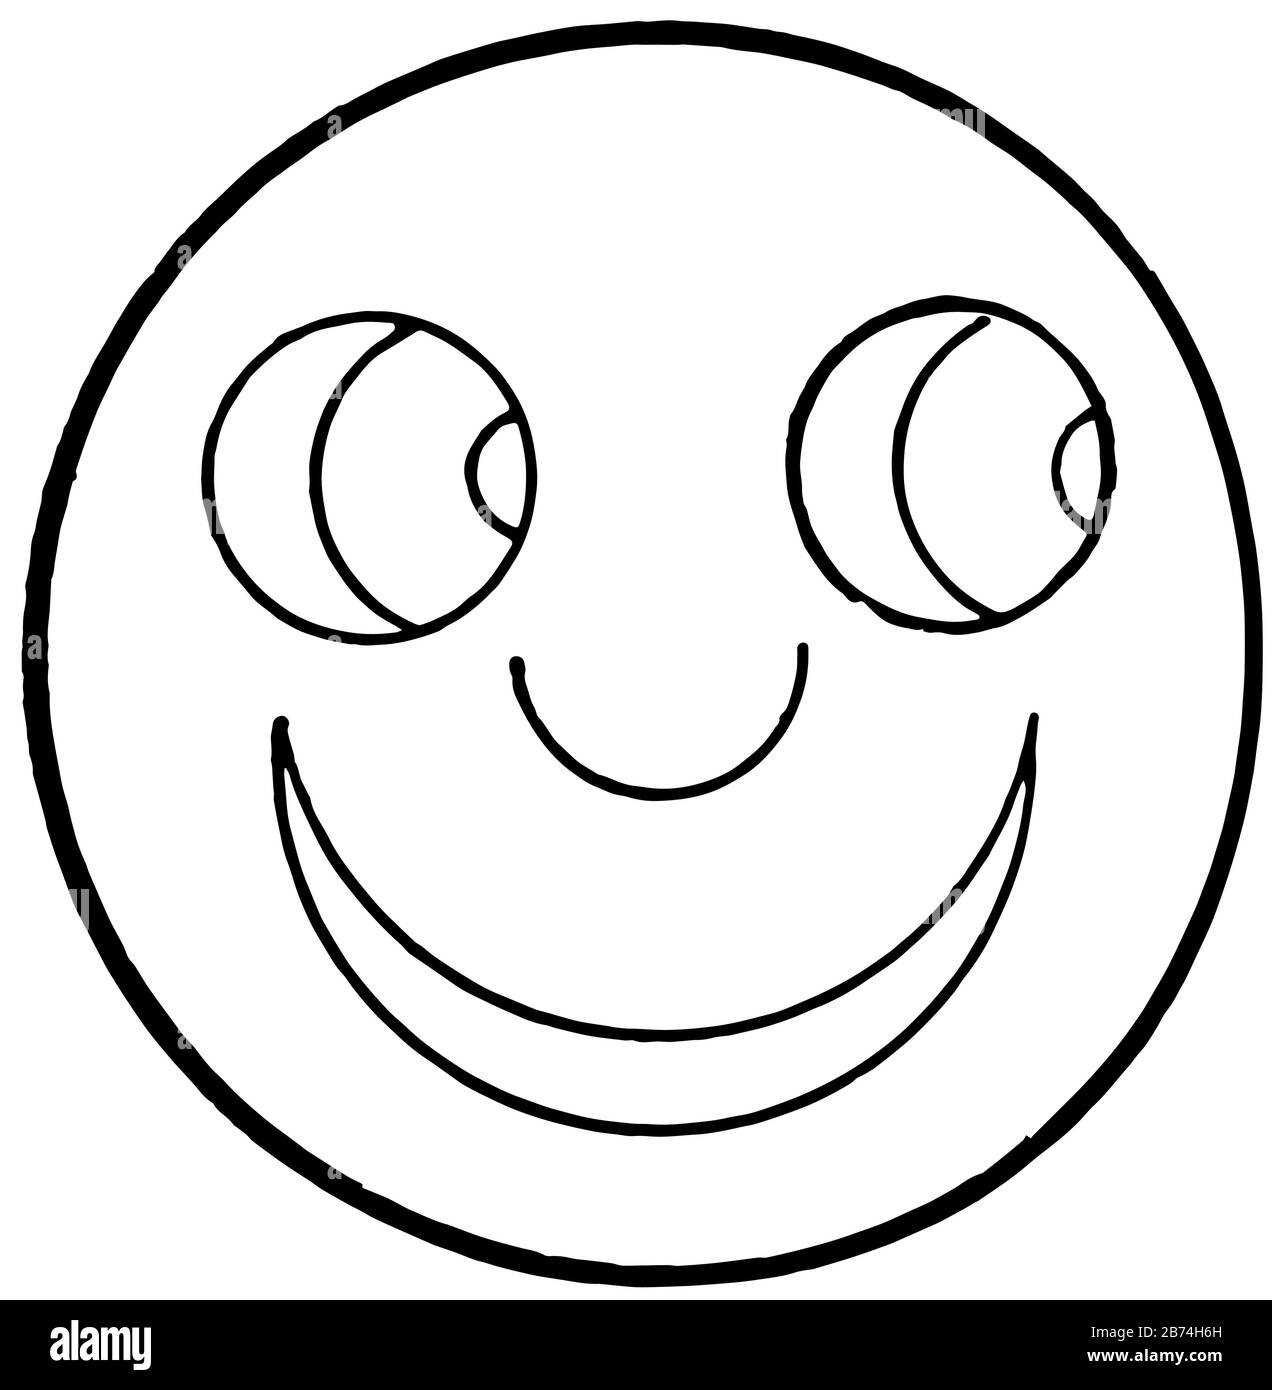 Smiley face Black and White Stock Photos & Images - Alamy